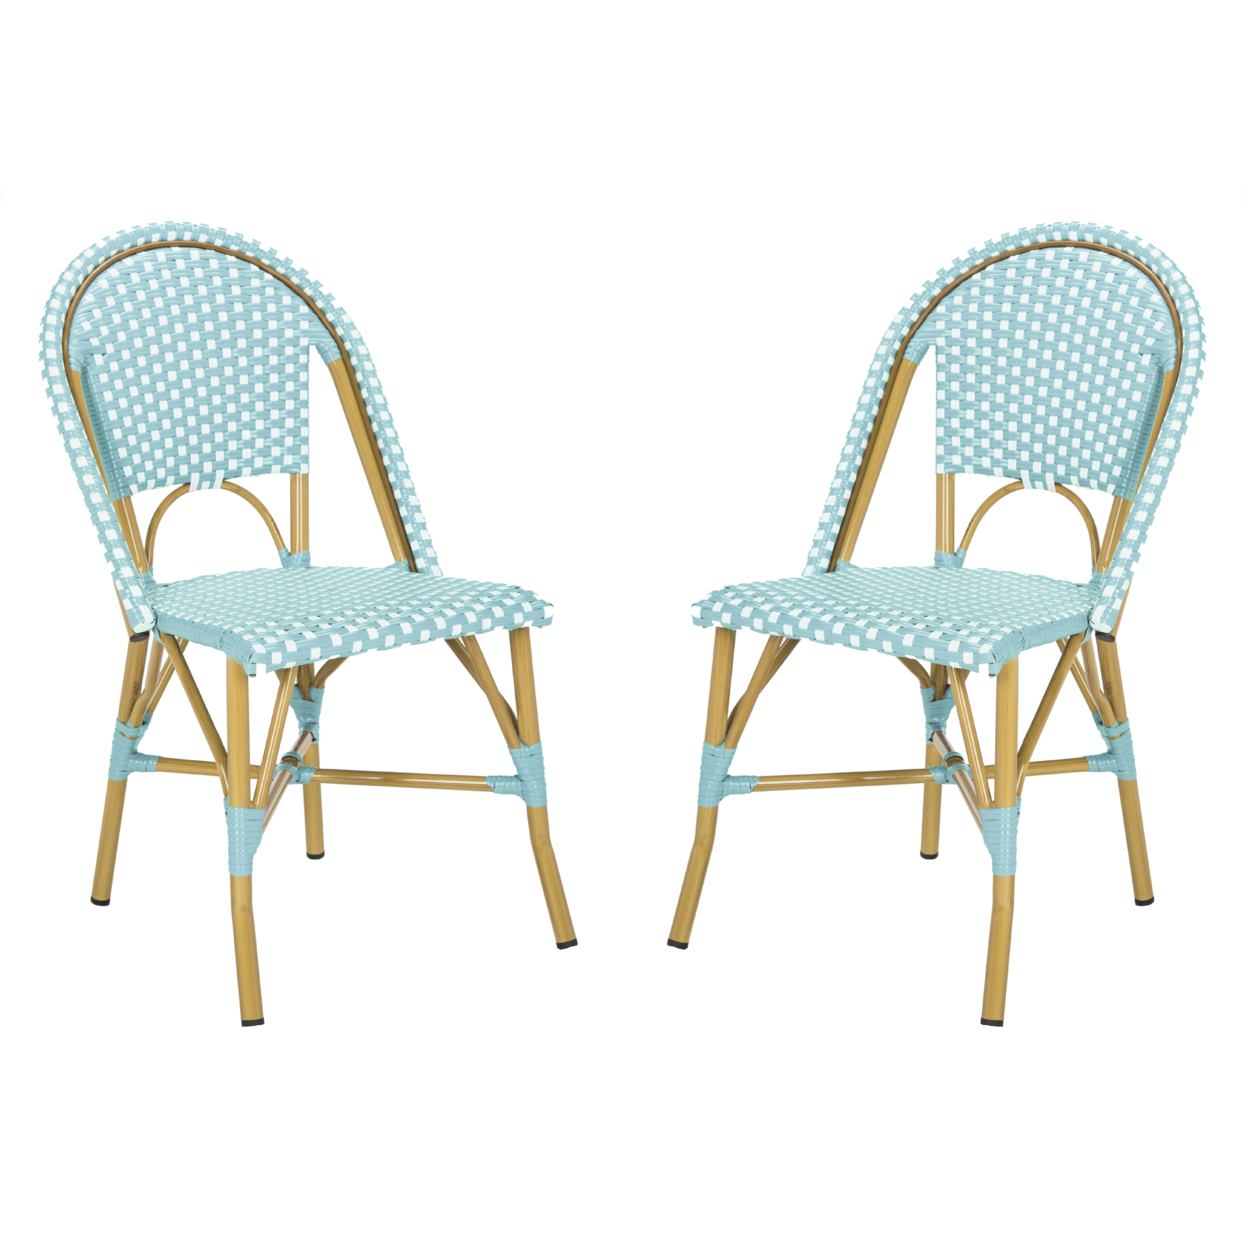 SAFAVIEH Outdoor Collection Salcha Bistro Side Chair Teal/White/Light Brown